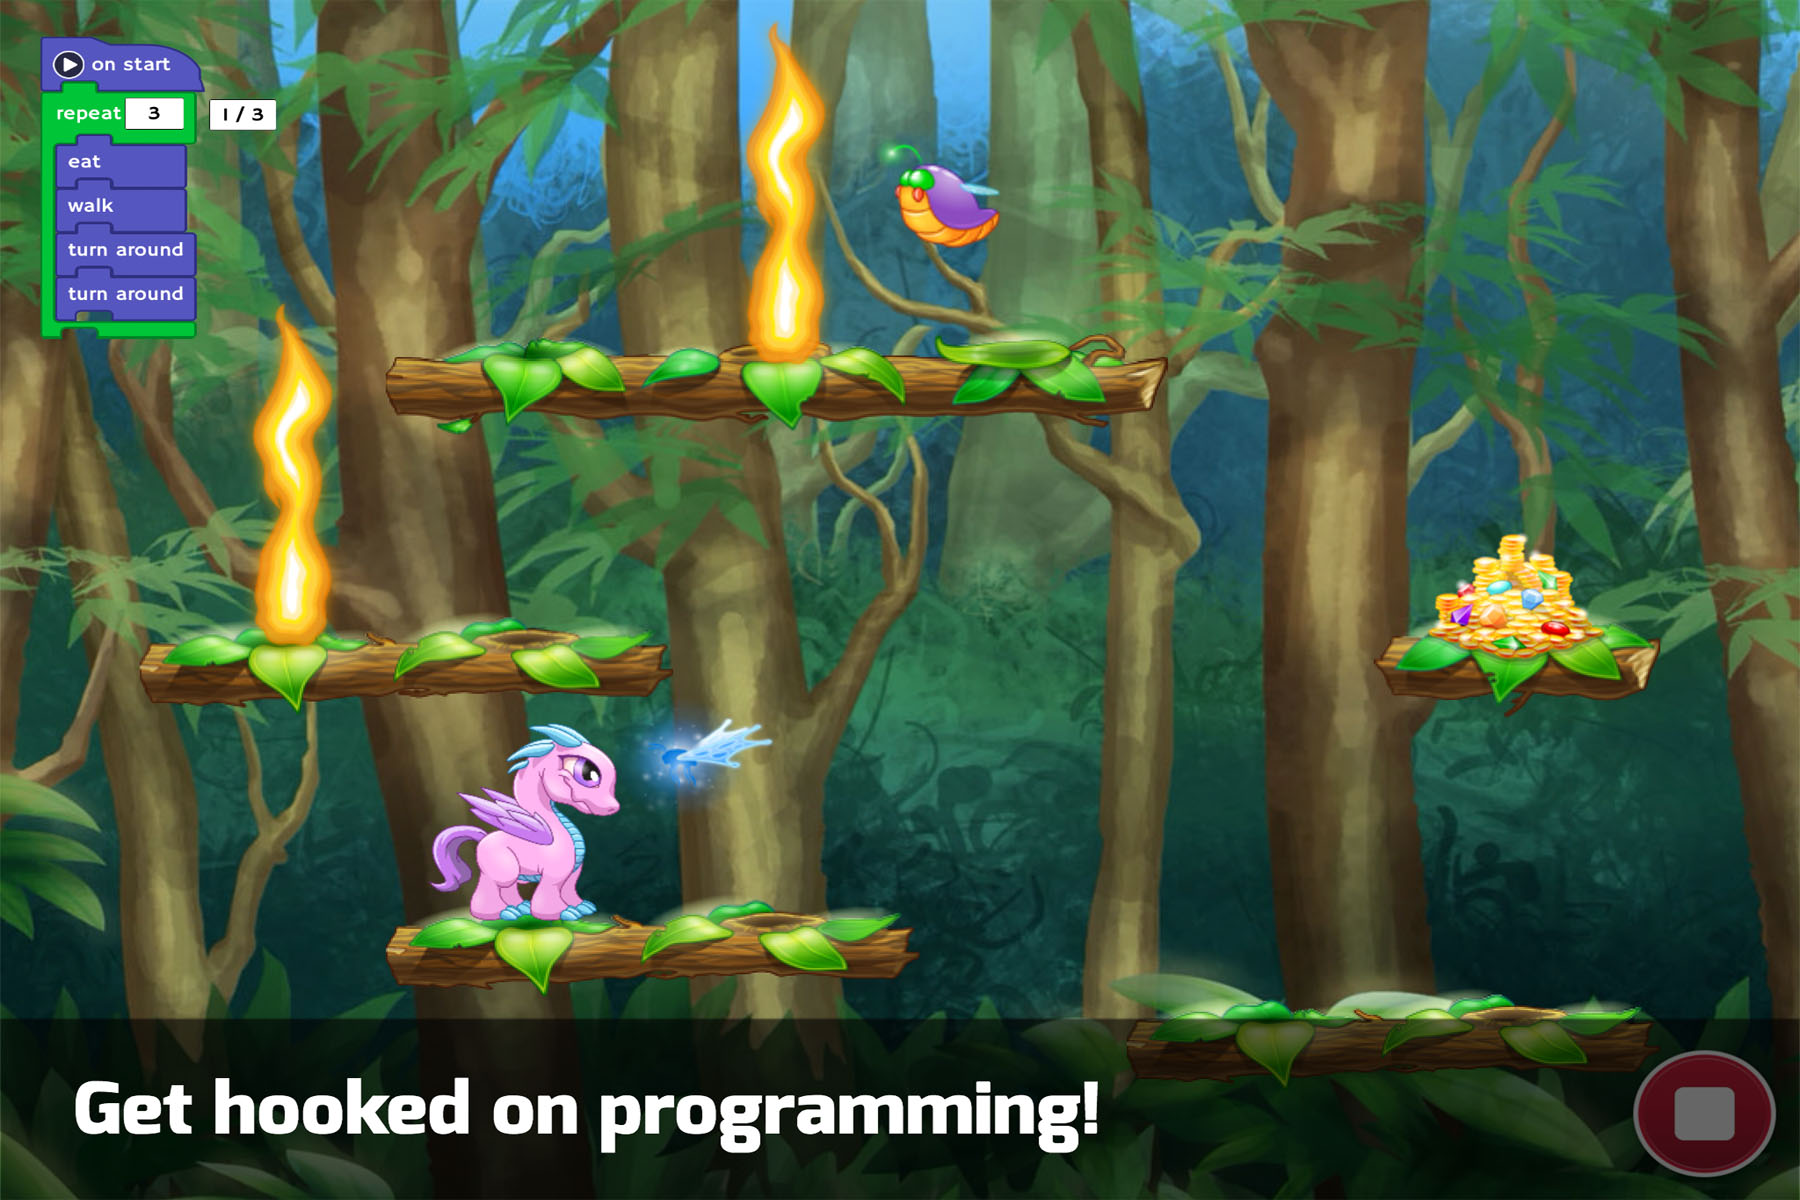 Tynker Dragon Journey Teaches Coding Concepts